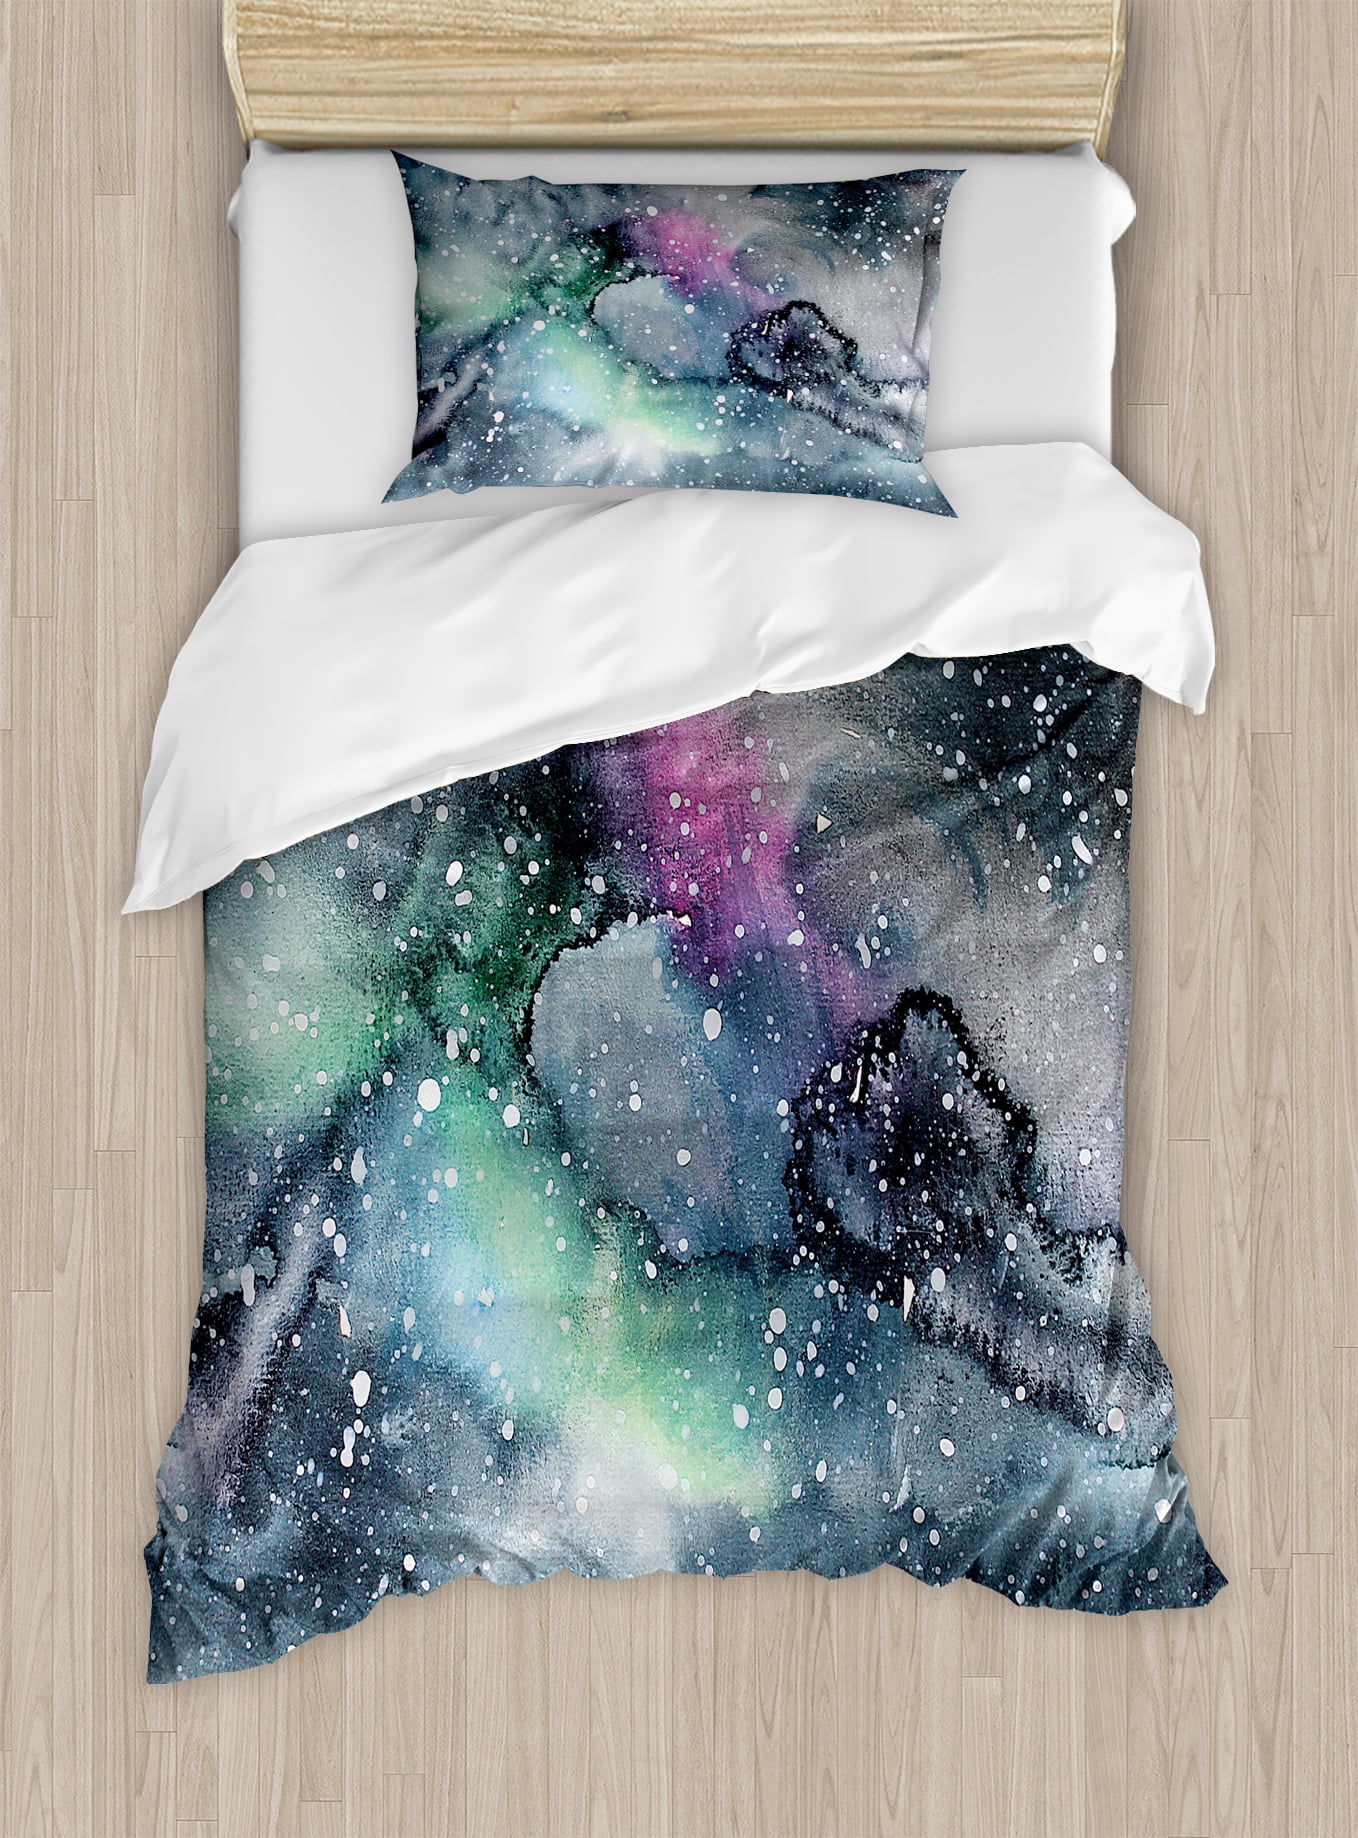 Twin Size Duvet Cover